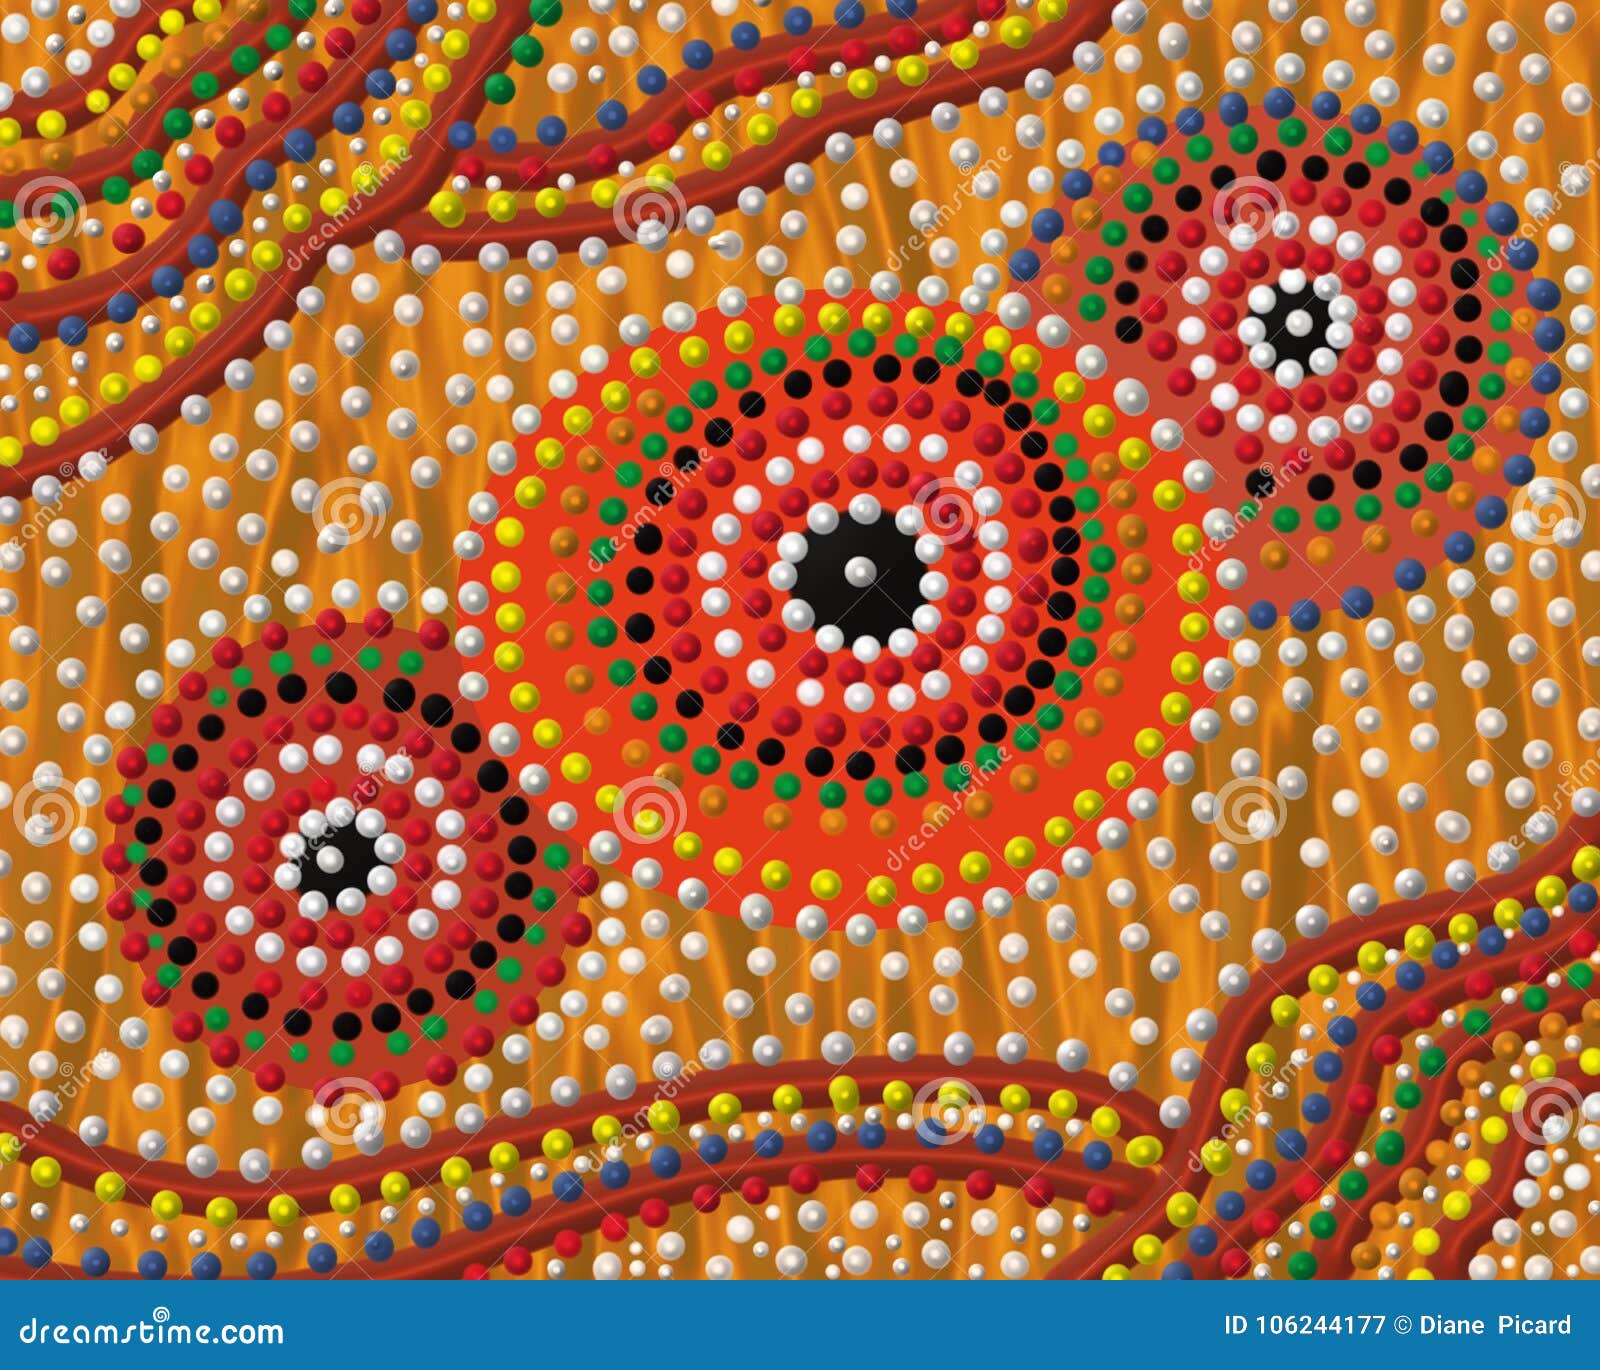 https://thumbs.dreamstime.com/z/ethnic-design-dots-circles-waves-colorful-pattern-tribal-dot-painting-water-holes-dot-painting-106244177.jpg